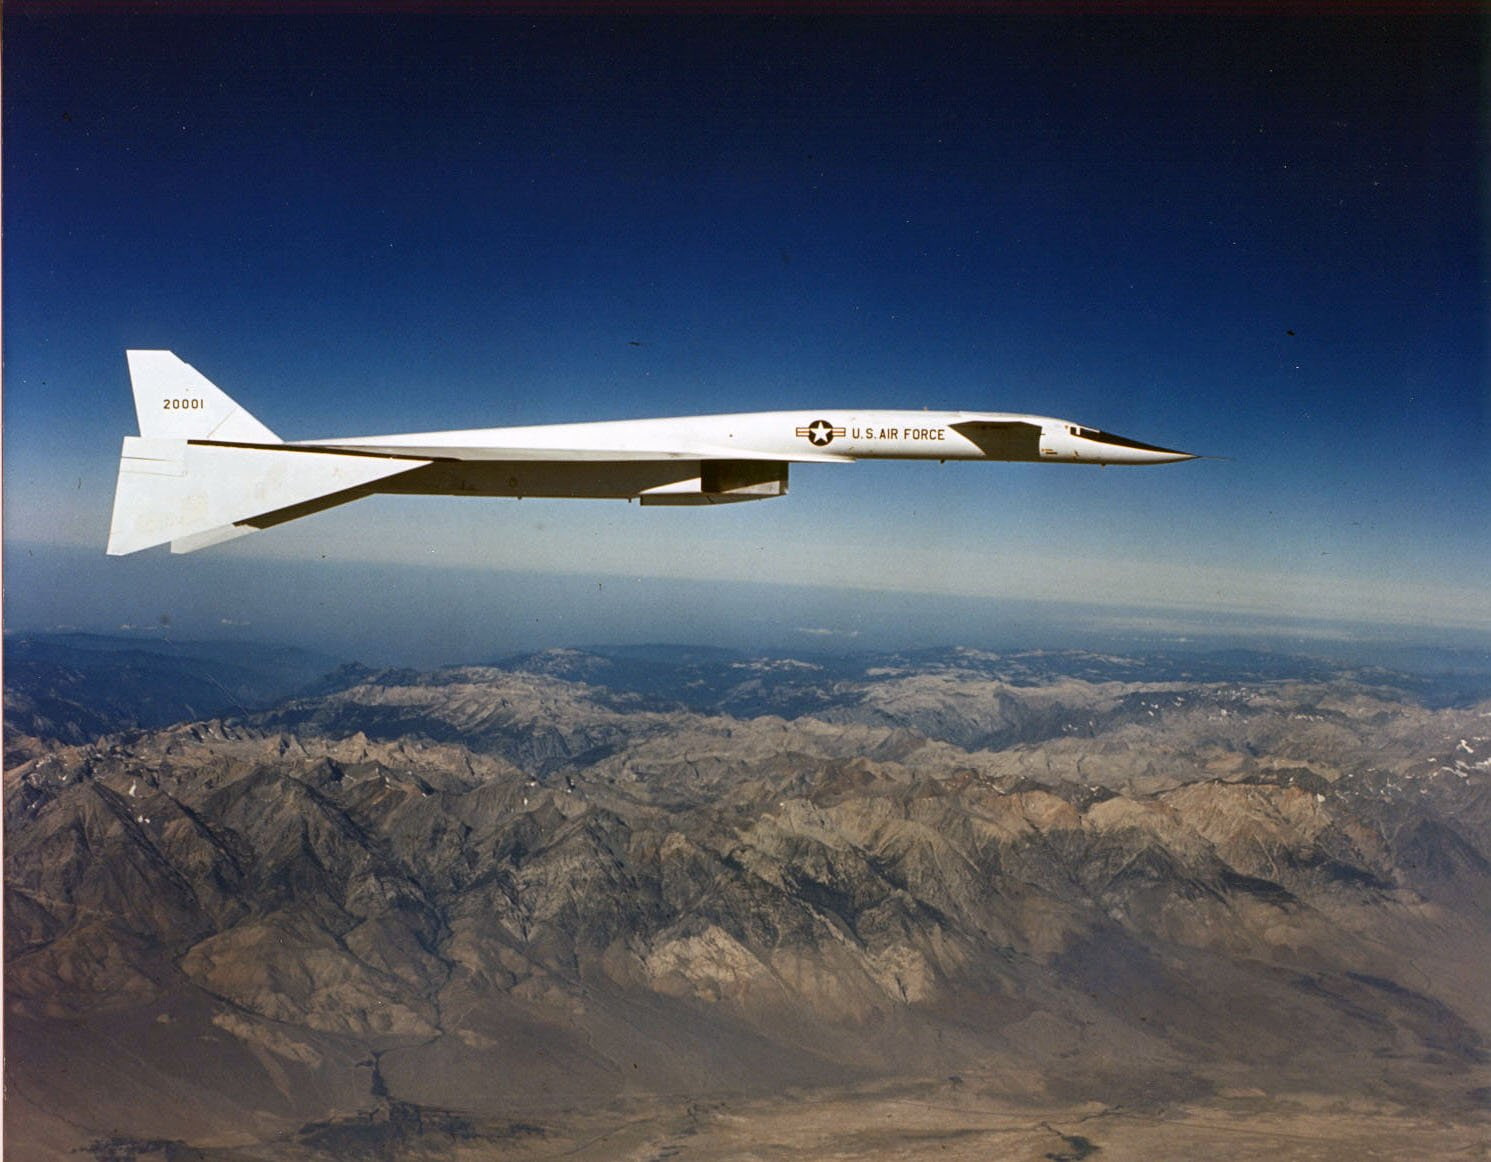 aircrafts, american, army, bomber, jet, north, prototype, supersonic